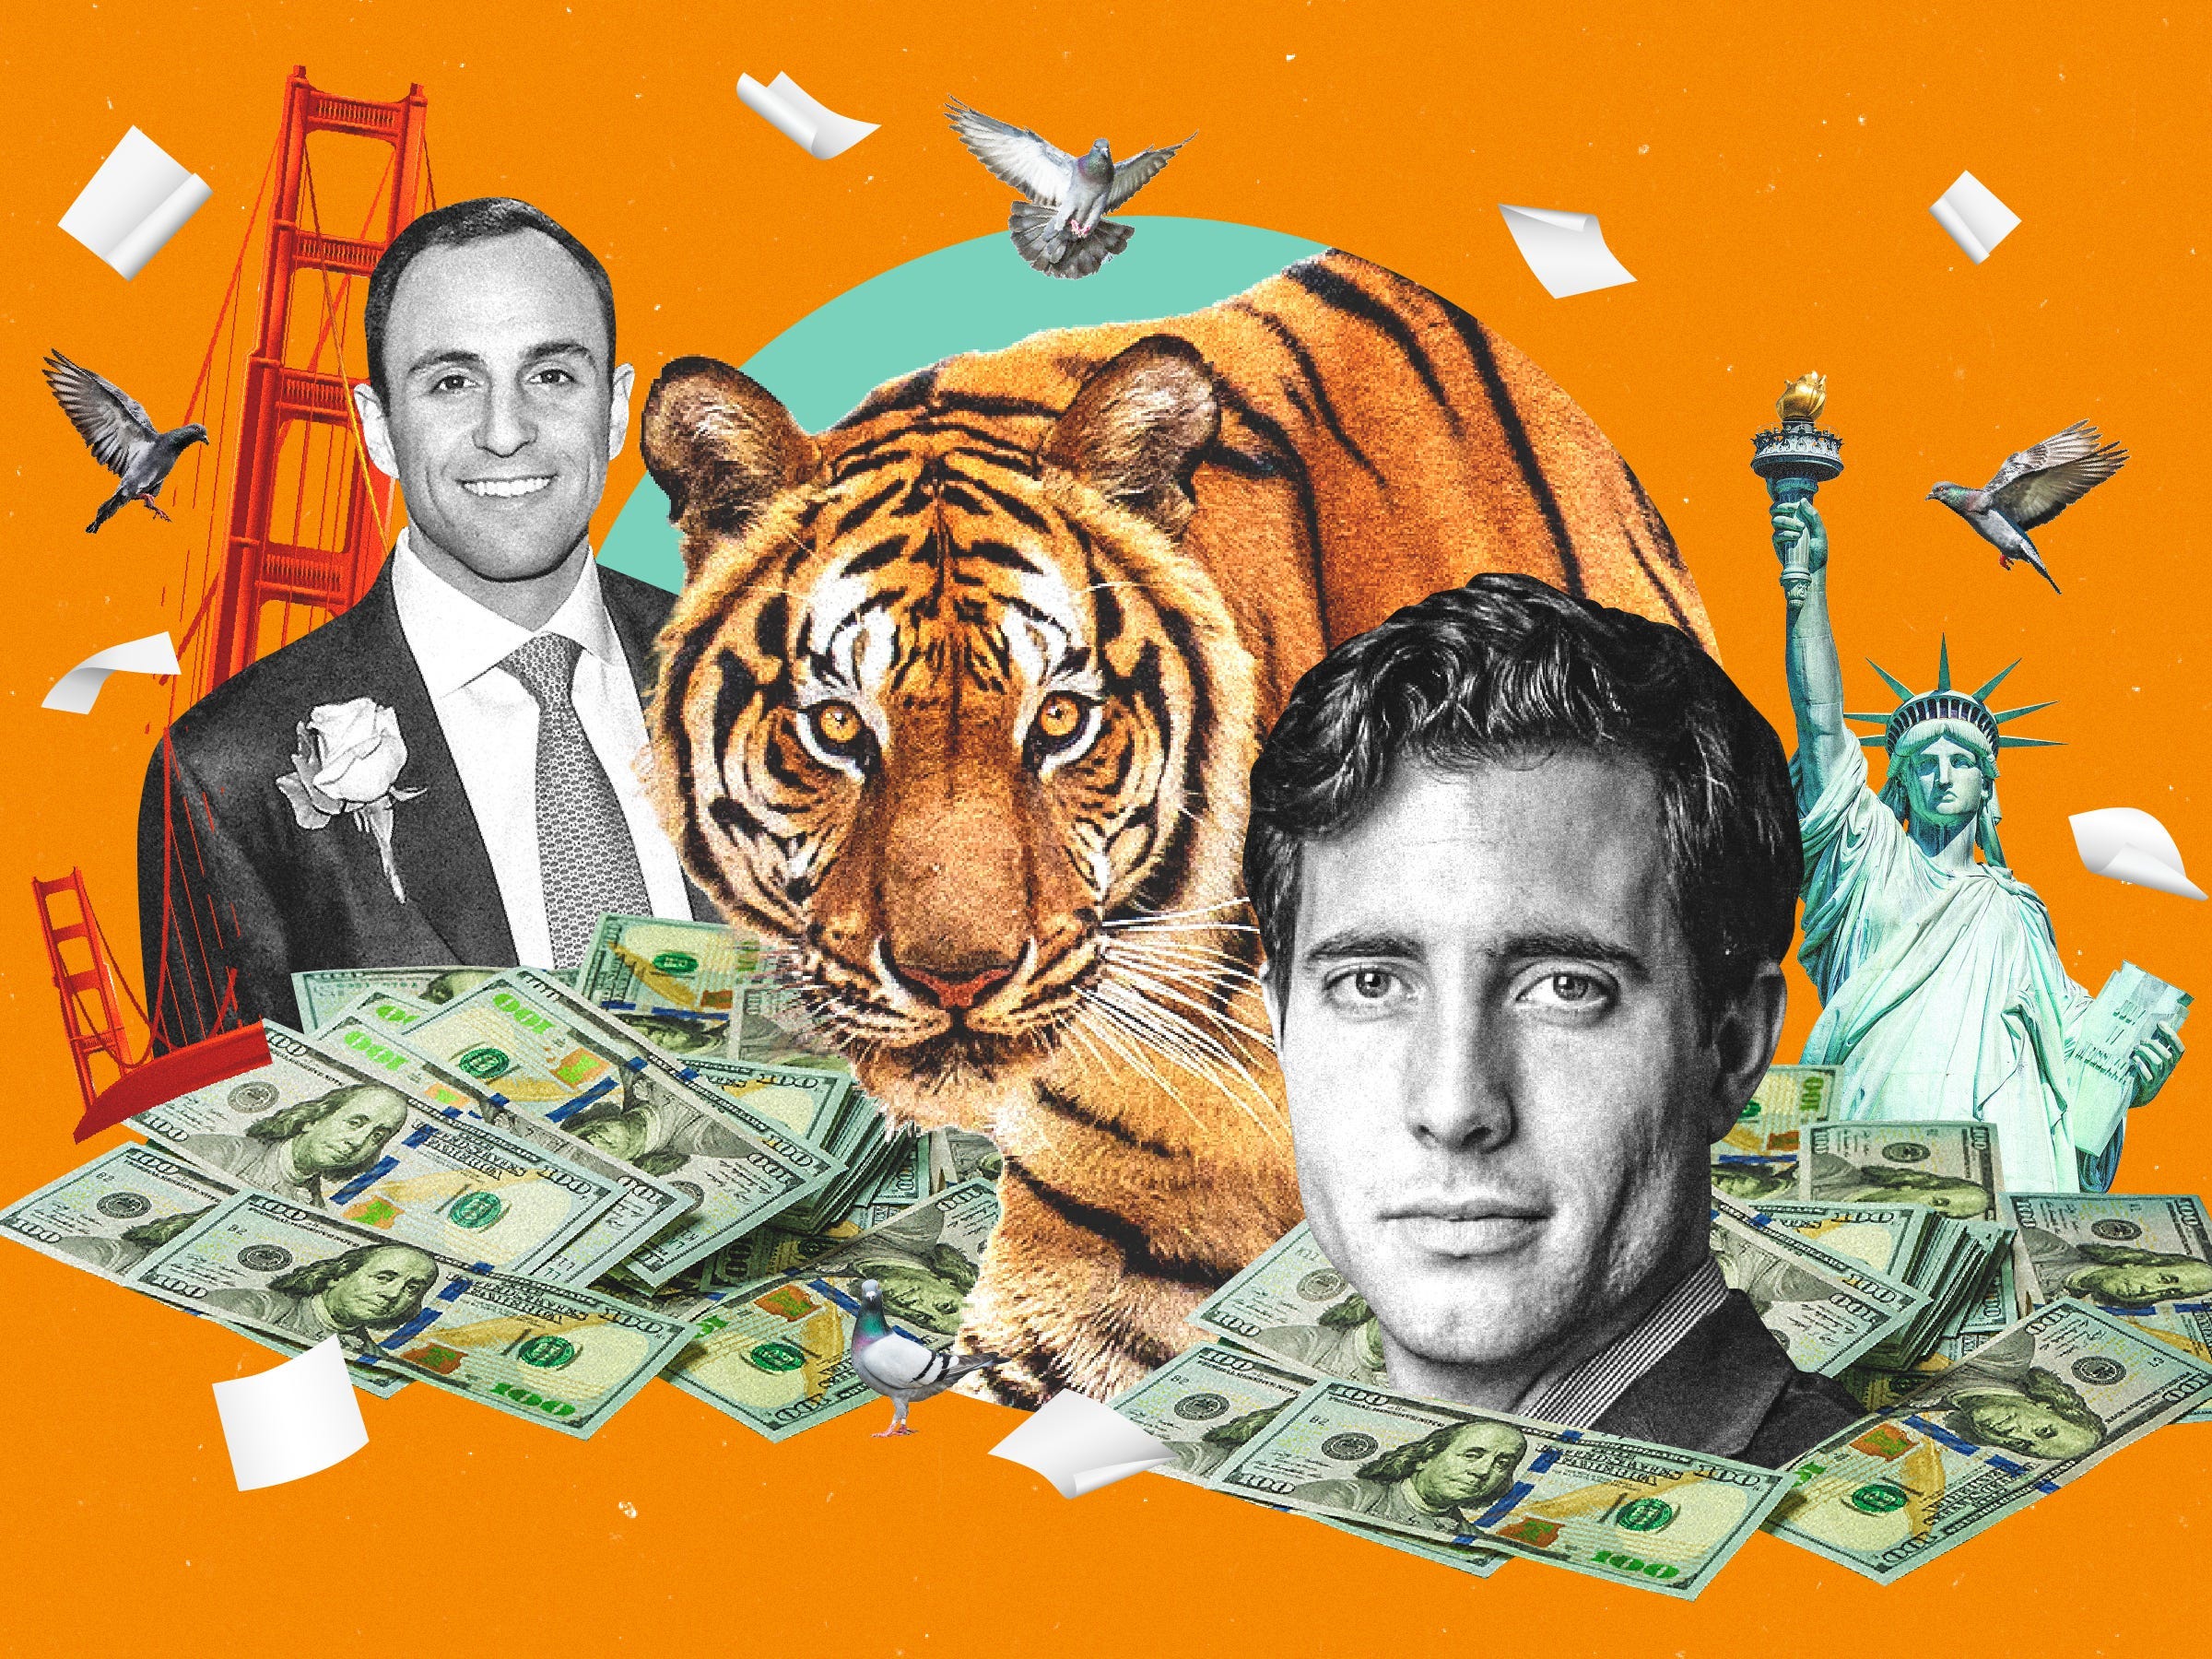 A large tiger surrounded by piles of money, pigeons, term sheets, a broken Golden Gate Bridge, the Statue of Liberty, Tiger Global partners, Scott Shleifer and John Curtius on an orange background